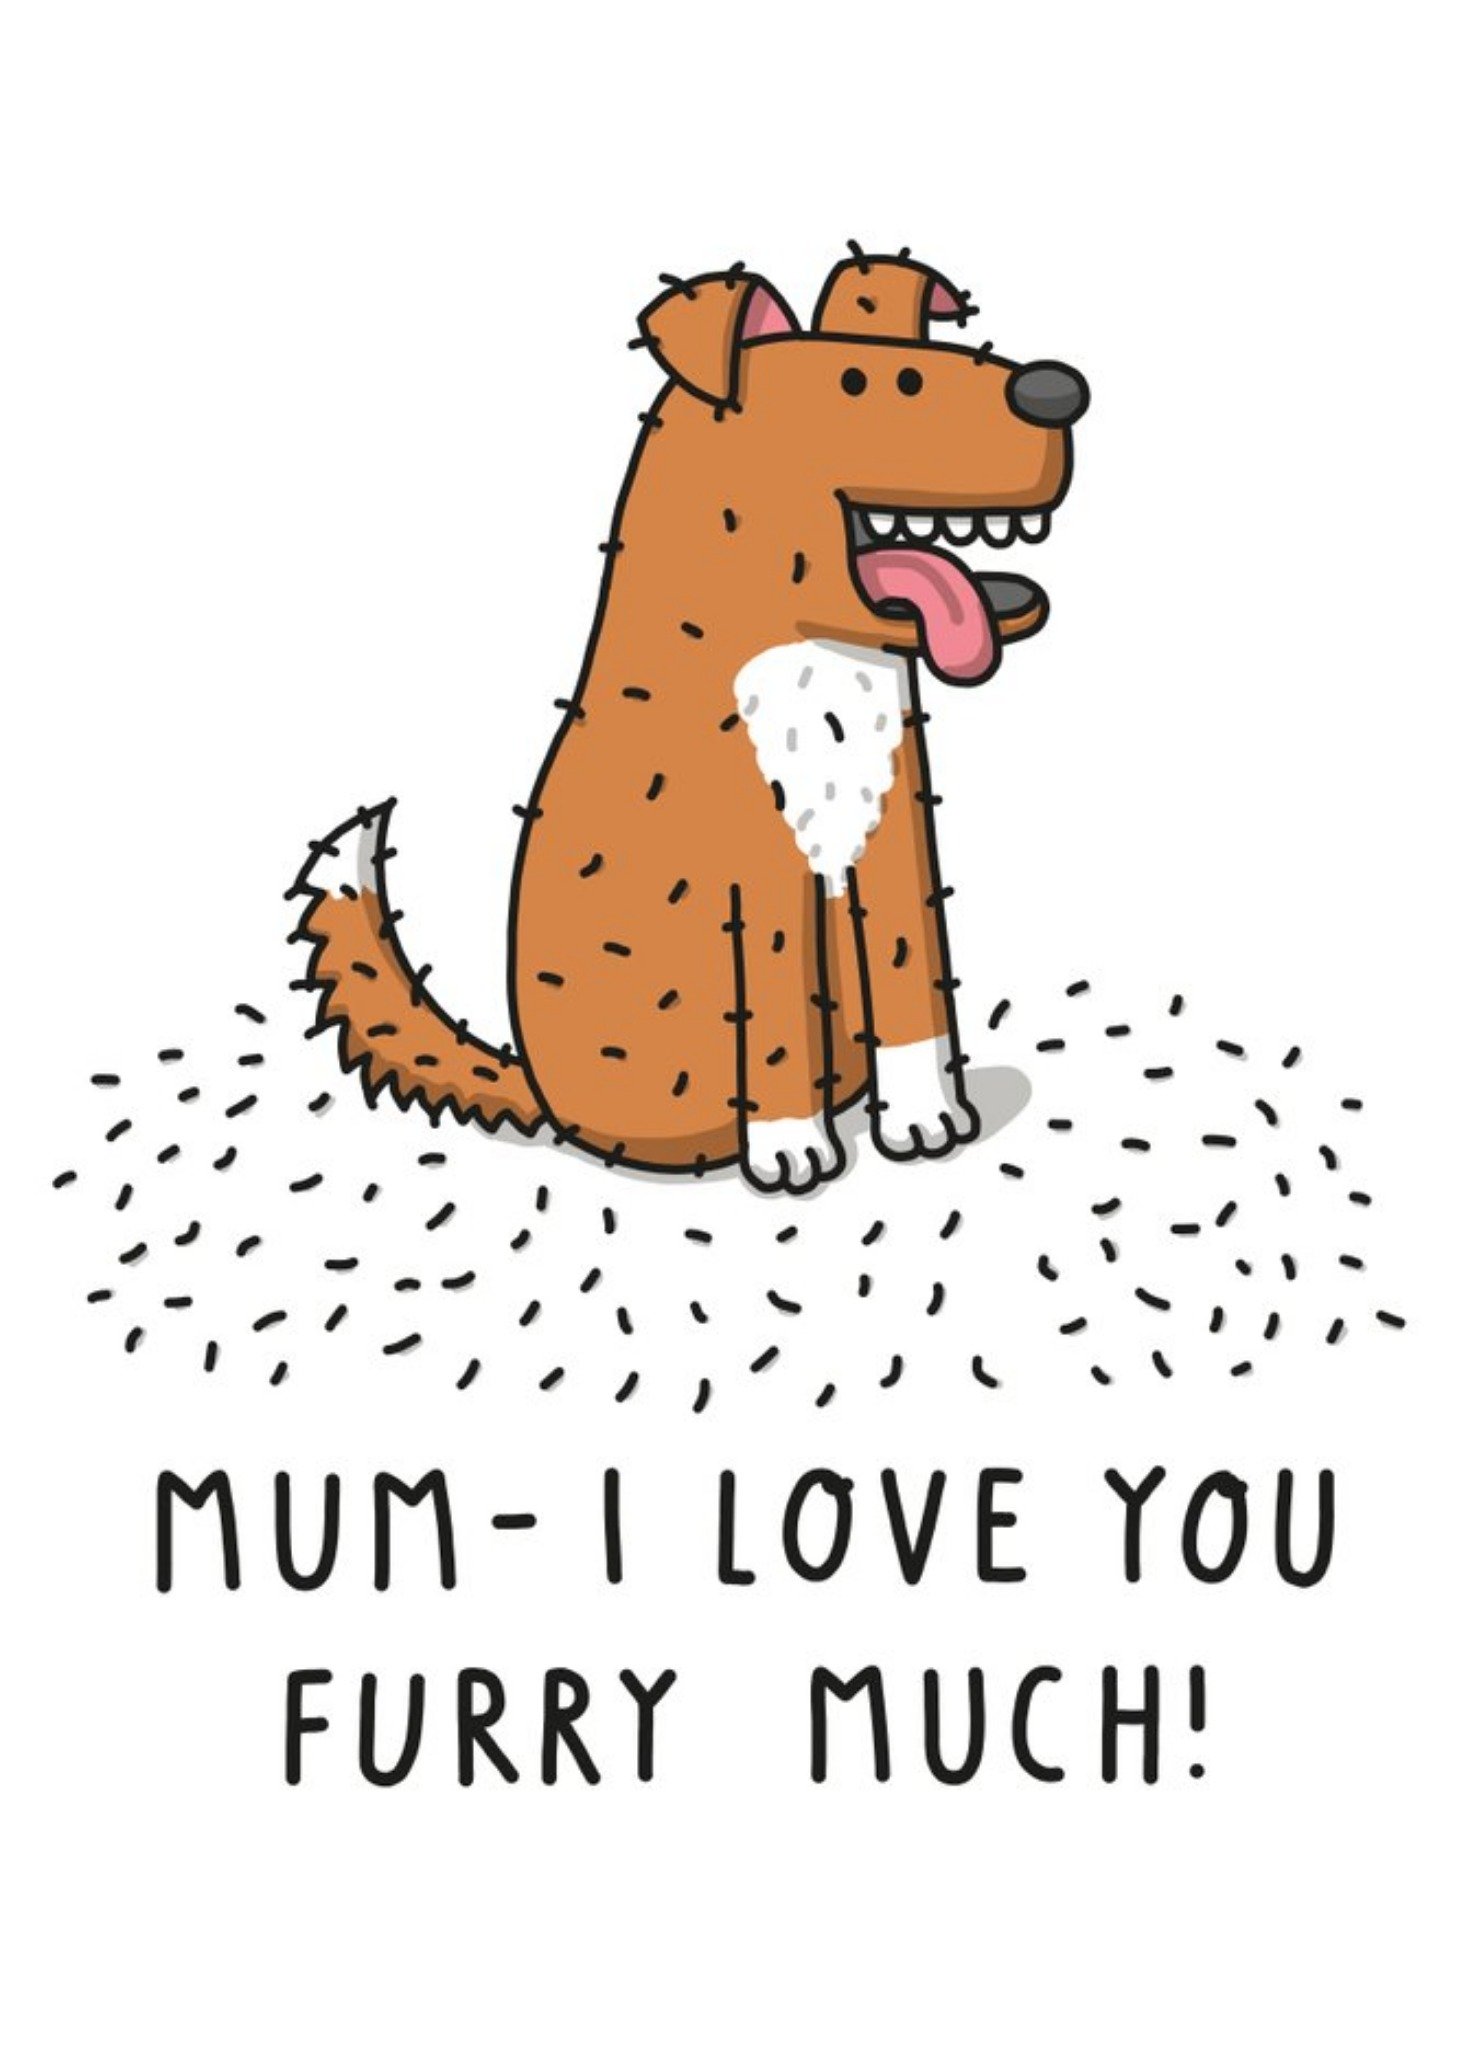 Moonpig Illustration Of A Scruffy Dog From The Dog Funny Pun Mother's Day Card Ecard